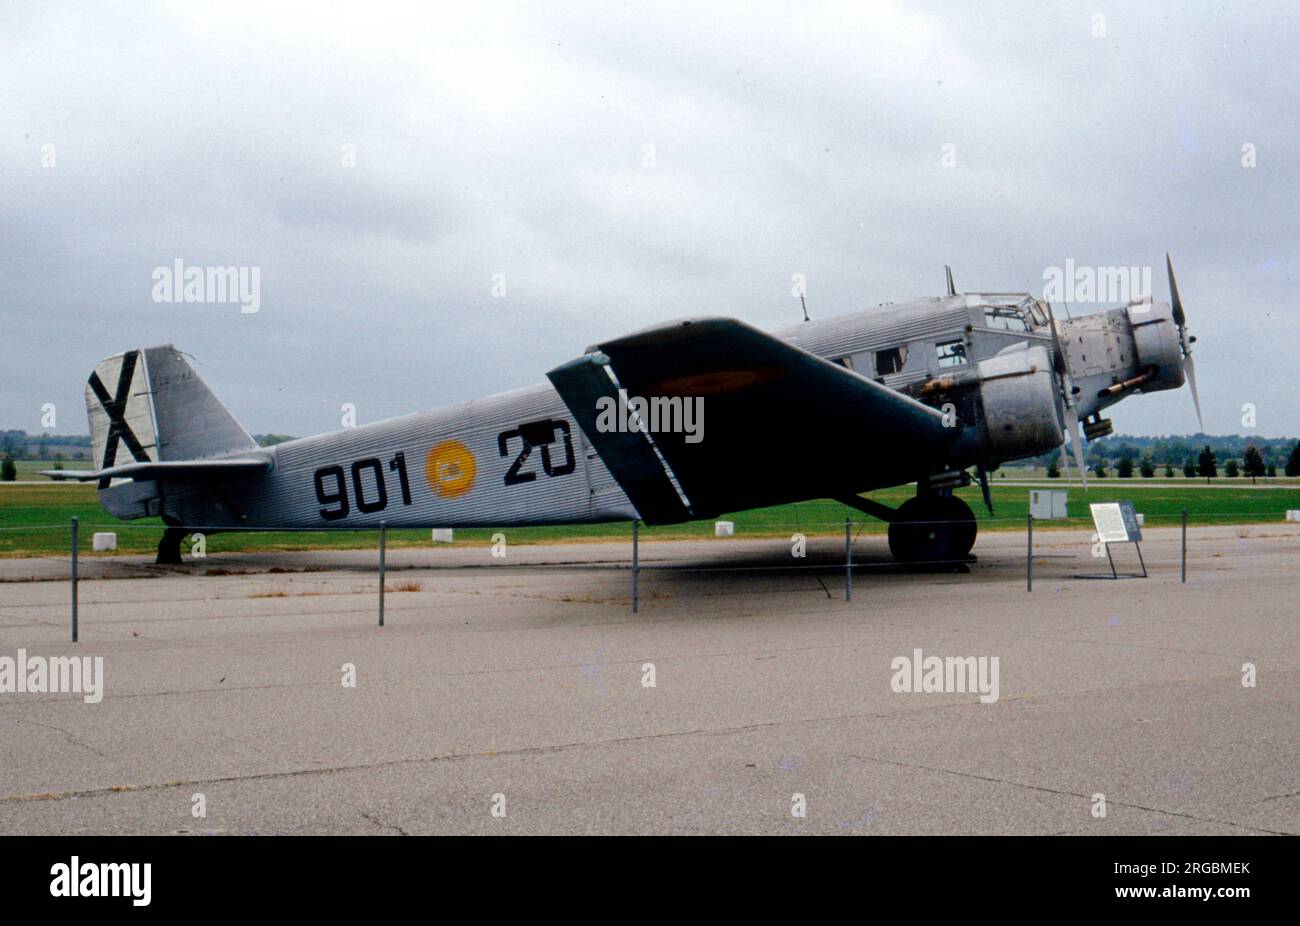 Junkers Ju 52 > National Museum of the United States Air Force